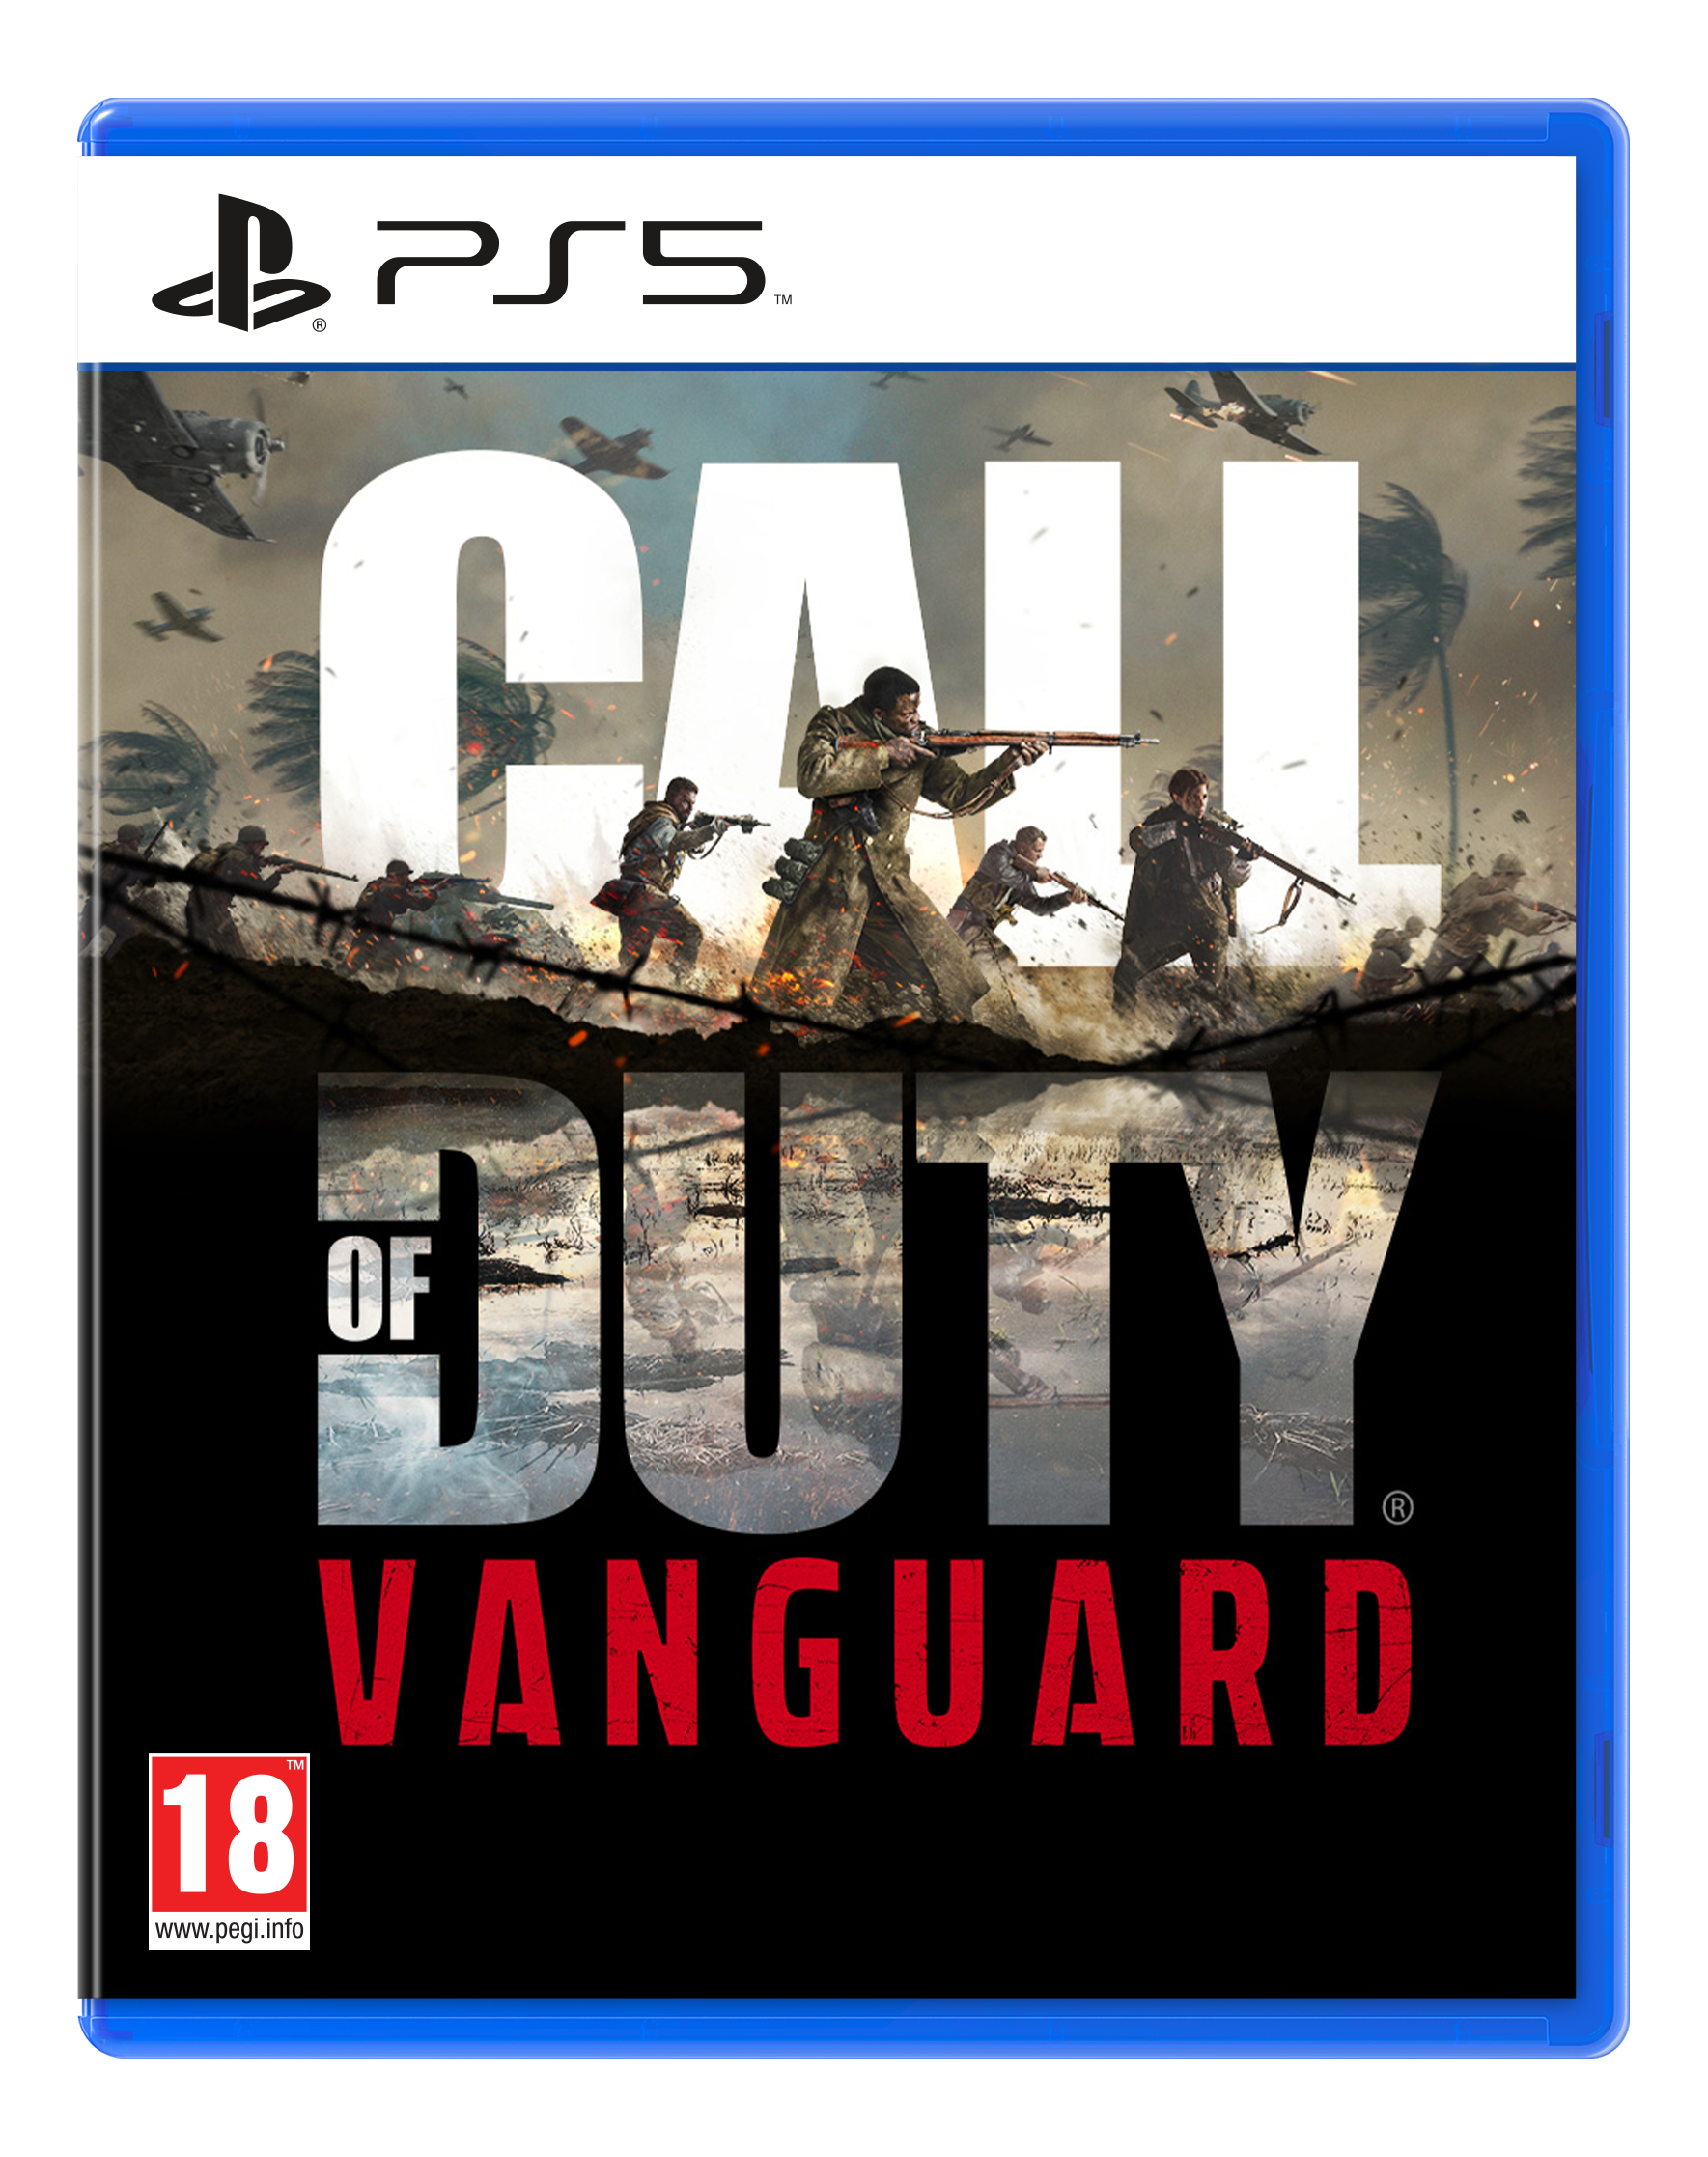 Call of Duty : Vanguard - PlayStation 5 - Francese